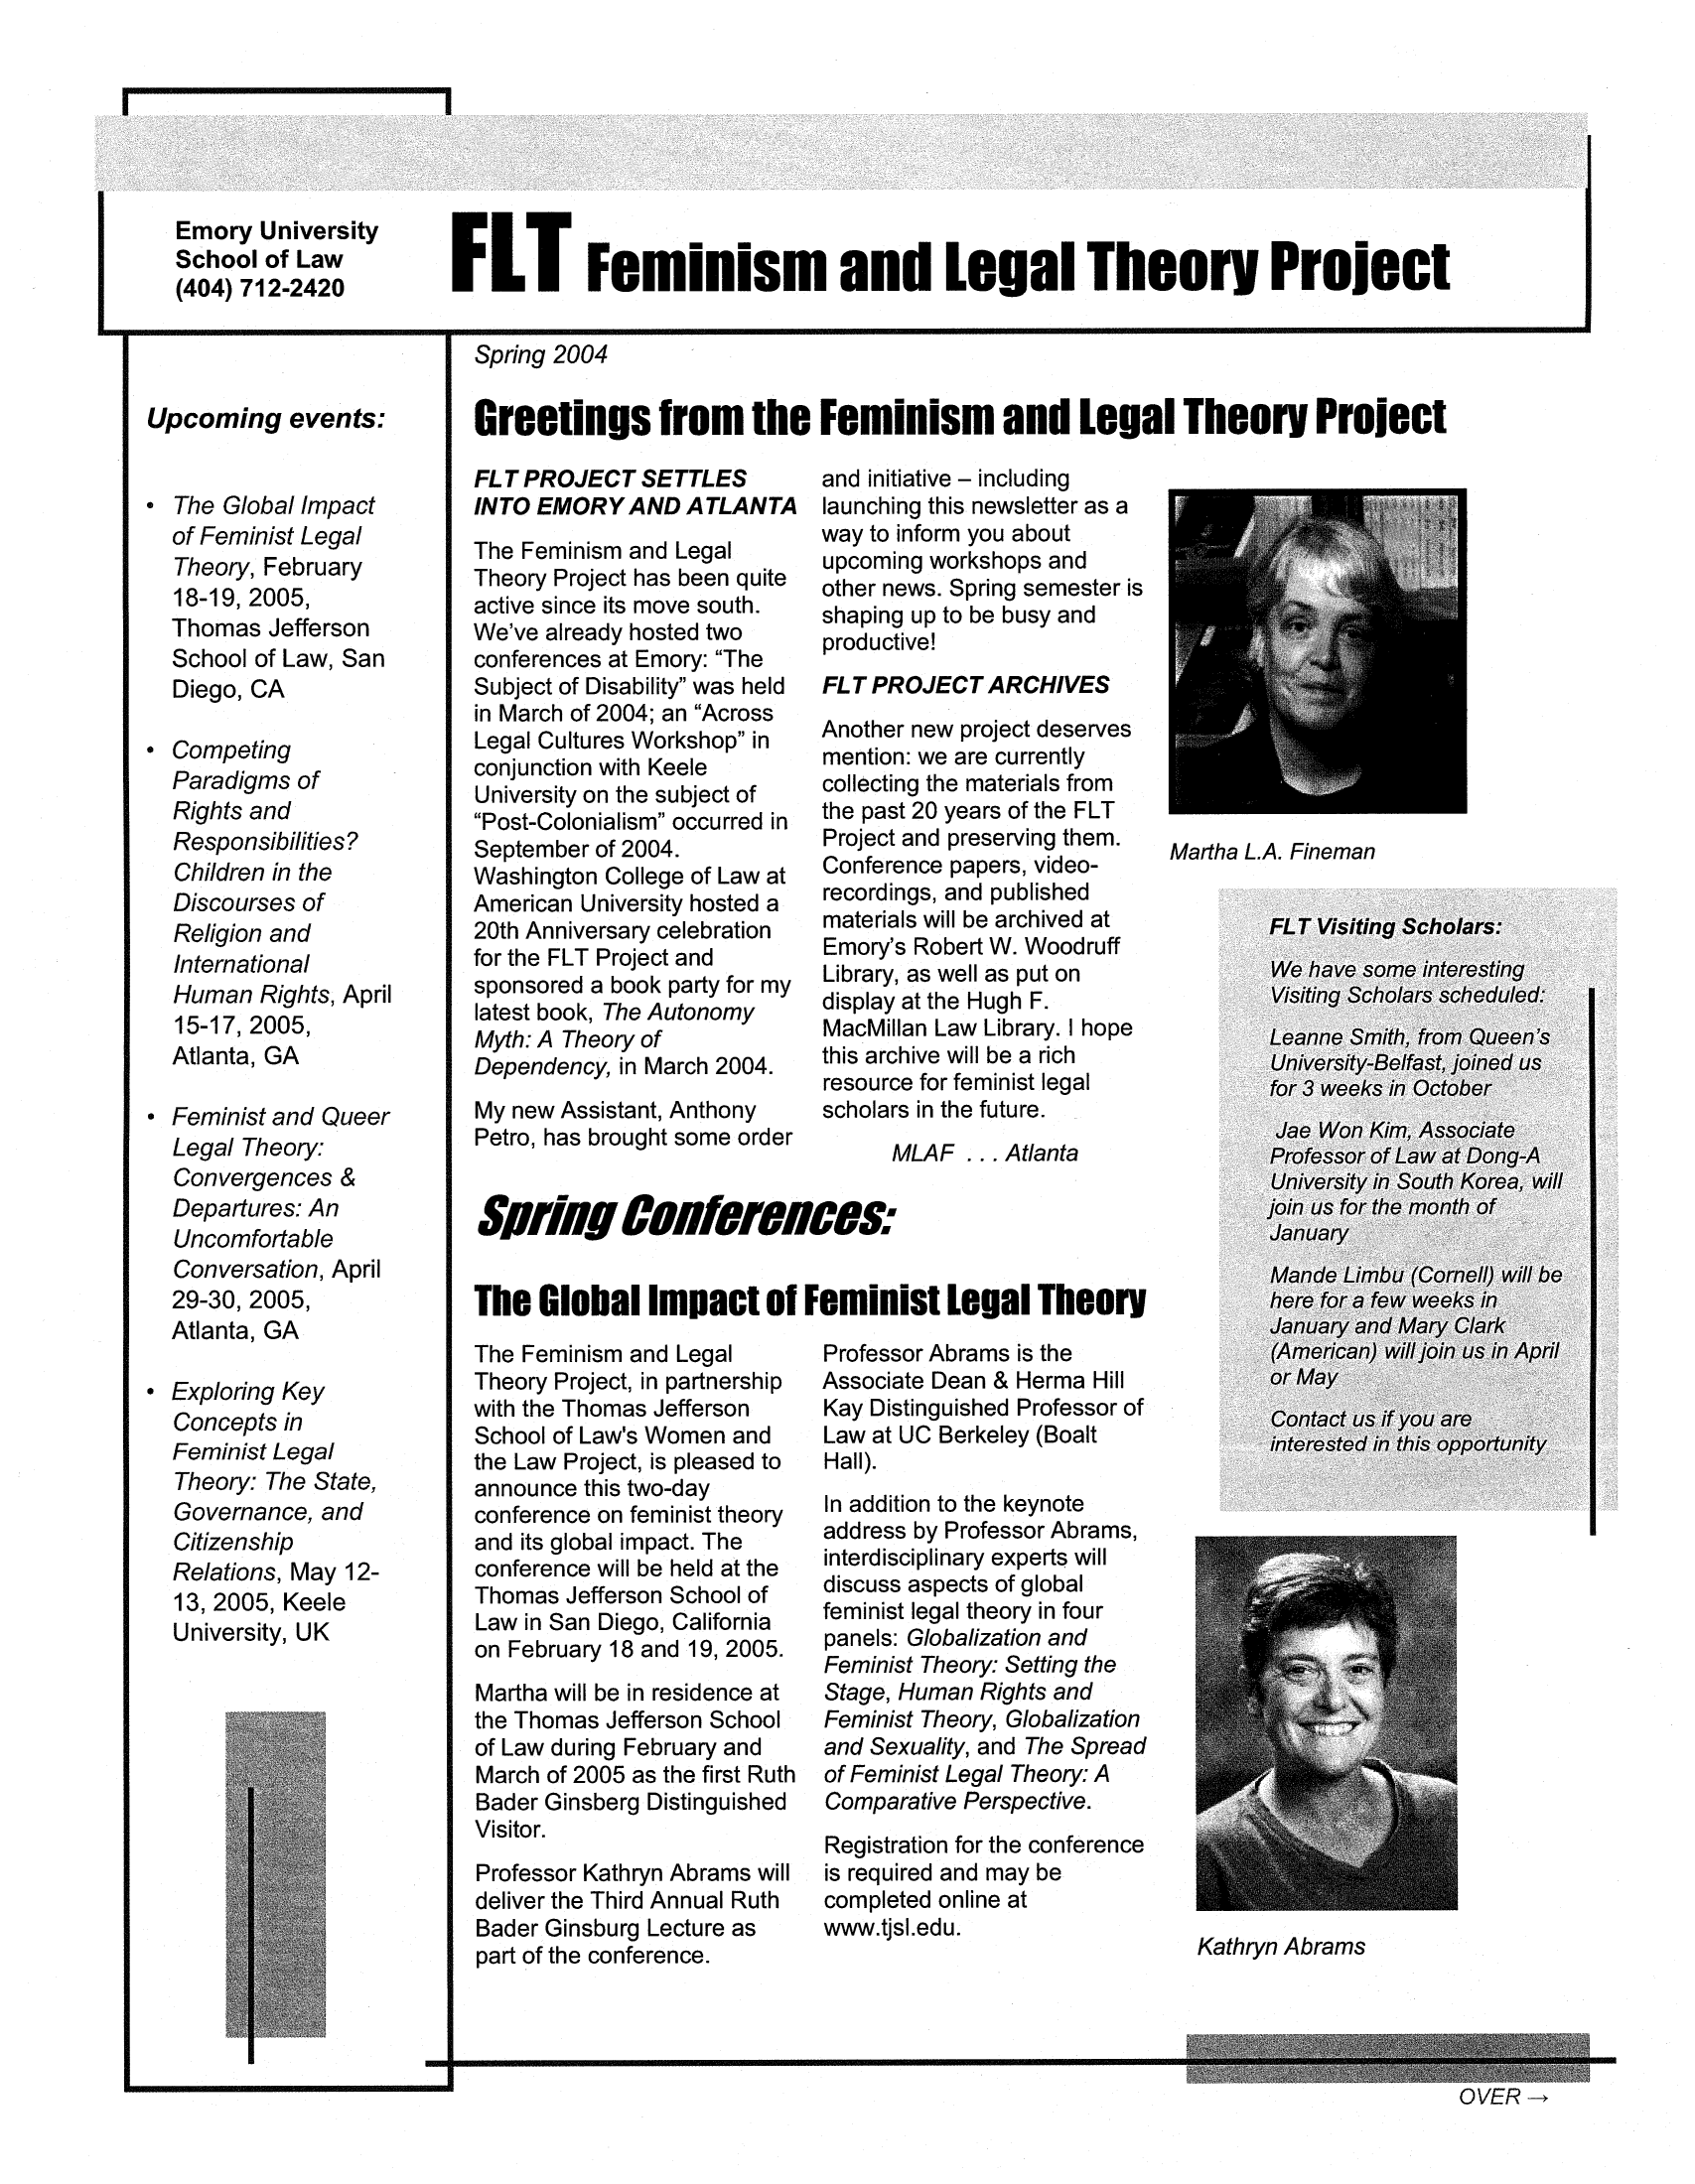 handle is hein.peggy/nwsltrs0001 and id is 1 raw text is: Emory University
School of Law FL Feminism and Legal TheorY Project
(404) 712-2420

Upcoming events:
* The Global Impact
of Feminist Legal
Theory, February
18-19, 2005,
Thomas Jefferson
School of Law, San
Diego, CA
* Competing
Paradigms of
Rights and
Responsibilities?
Children in the
Discourses of
Religion and
International
Human Rights, April
15-17, 2005,
Atlanta, GA
* Feminist and Queer
Legal Theory:
Convergences &
Departures: An
Uncomfortable
Conversation, April
29-30, 2005,
Atlanta, GA
* Exploring Key
Concepts in
Feminist Legal
Theory: The State,
Governance, and
Citizenship
Relations, May 12-
13, 2005, Keele
University, UK

I

-I

Spring 2004
Greetings from the Feminism and Legal Theory Project

FL T PROJECT SETTLES
INTO EMORY AND ATLANTA
The Feminism and Legal
Theory Project has been quite
active since its move south.
We've already hosted two
conferences at Emory: The
Subject of Disability' was held
in March of 2004; an Across
Legal Cultures Workshop in
conjunction with Keele
University on the subject of
Post-Colonialism occurred in
September of 2004.
Washington College of Law at
American University hosted a
20th Anniversary celebration
for the FLT Project and
sponsored a book party for my
latest book, The Autonomy
Myth: A Theory of
Dependency, in March 2004.
My new Assistant, Anthony
Petro, has brought some order

and initiative - including
launching this newsletter as a
way to inform you about
upcoming workshops and
other news. Spring semester is
shaping up to be busy and
productive!
FLT PROJECT ARCHIVES
Another new project deserves
mention: we are currently
collecting the materials from
the past 20 years of the FLT
Project and preserving them.
Conference papers, video-
recordings, and published
materials will be archived at
Emory's Robert W. Woodruff
Library, as well as put on
display at the Hugh F.
MacMillan Law Library. I hope
this archive will be a rich
resource for feminist legal
scholars in the future.
MLAF ... Atlanta

Martha L.A. Fineman

The Feminism and Legal
Theory Project, in partnership
with the Thomas Jefferson
School of Law's Women and
the Law Project, is pleased to
announce this two-day
conference on feminist theory
and its global impact. The
conference will be held at the
Thomas Jefferson School of
Law in San Diego, California
on February 18 and 19, 2005.
Martha will be in residence at
the Thomas Jefferson School
of Law during February and
March of 2005 as the first Ruth
Bader Ginsberg Distinguished
Visitor.
Professor Kathryn Abrams will
deliver the Third Annual Ruth
Bader Ginsburg Lecture as
part of the conference.

Professor Abrams is the
Associate Dean & Herma Hill
Kay Distinguished Professor of
Law at UC Berkeley (Boalt
Hall).
In addition to the keynote
address by Professor Abrams,
interdisciplinary experts will
discuss aspects of global
feminist legal theory in four
panels: Globalization and
Feminist Theory: Setting the
Stage, Human Rights and
Feminist Theory, Globalization
and Sexuality, and The Spread
of Feminist Legal Theory: A
Comparative Perspective.
Registration for the conference
is required and may be
completed online at
www.tjsl.edu.

SfiHSCOG8fereIces.
The Global Impact of Feminist Legal Theory

Kathryn Abrams

OVER-*


